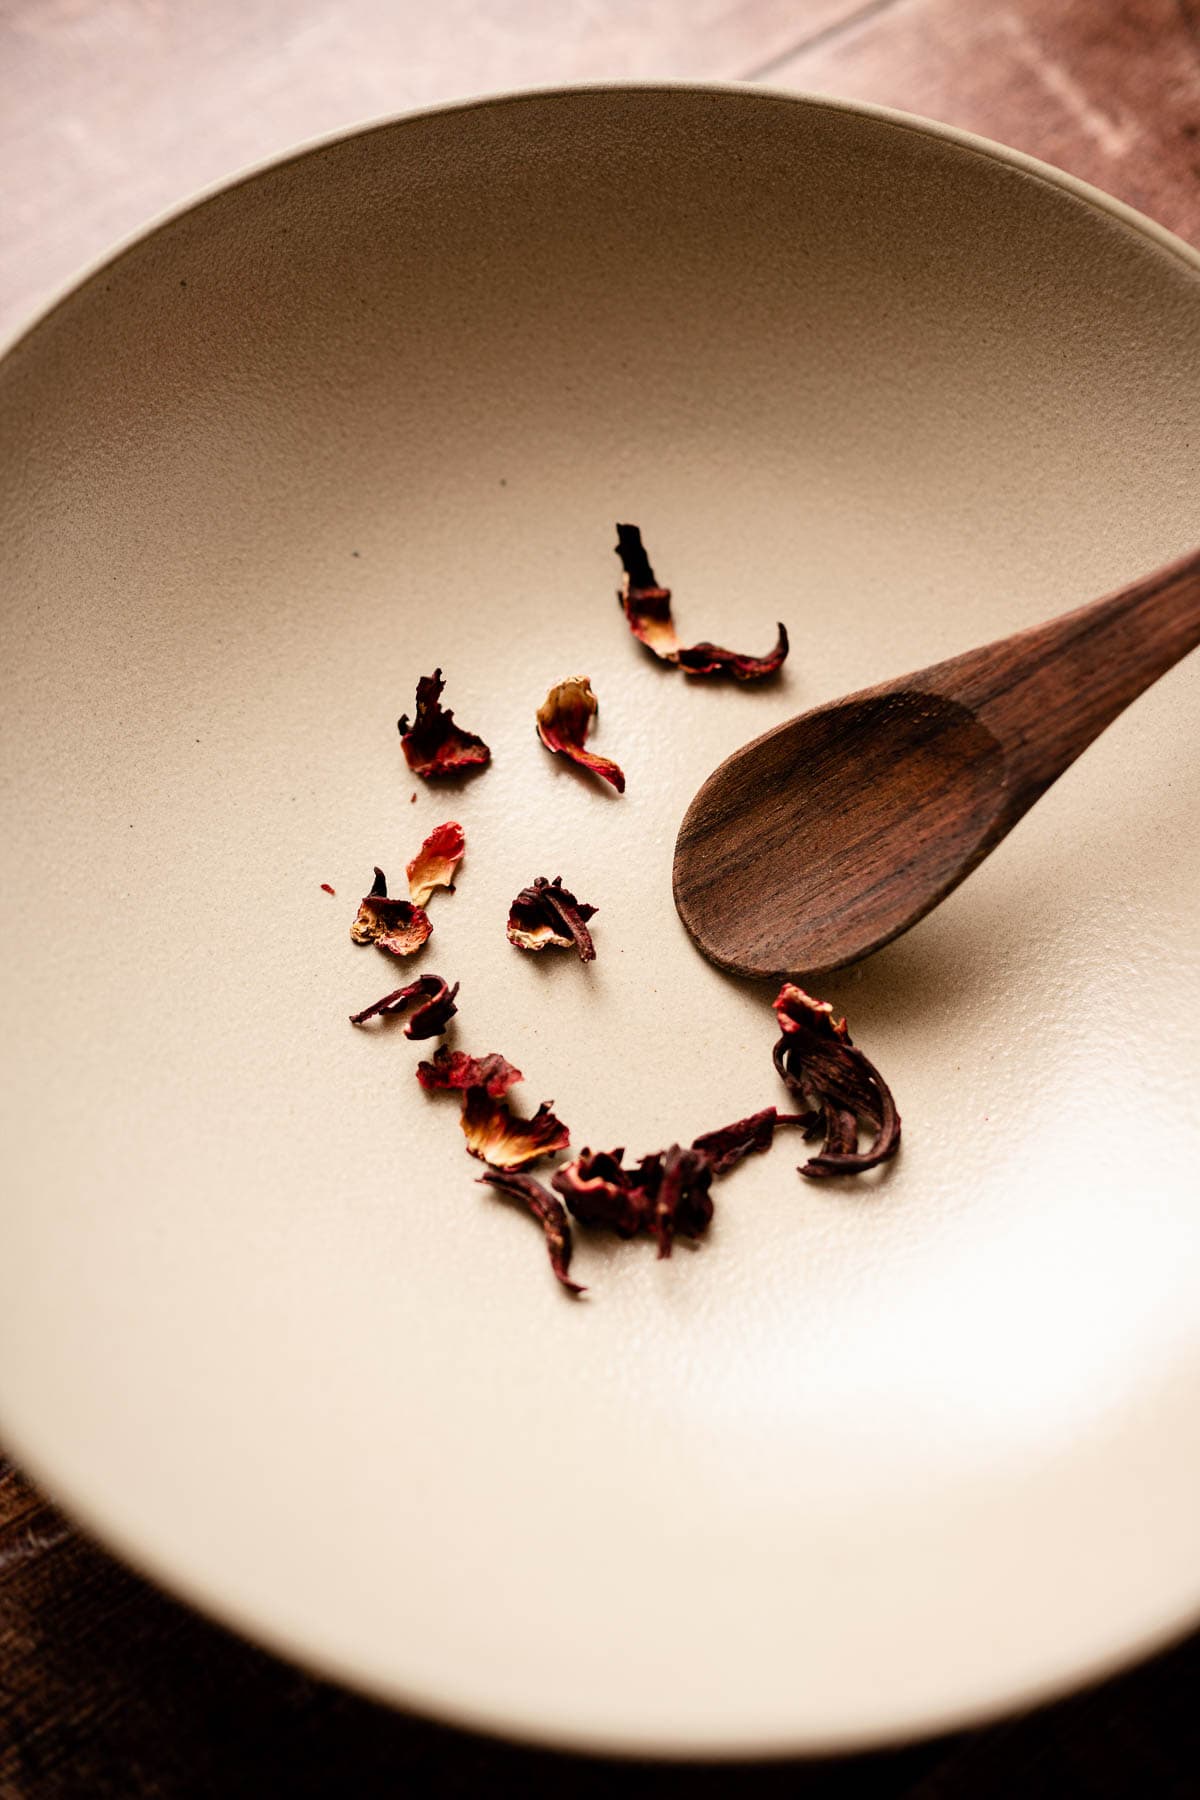 A tan ceramic bowl filled with dried hibiscus flowers.